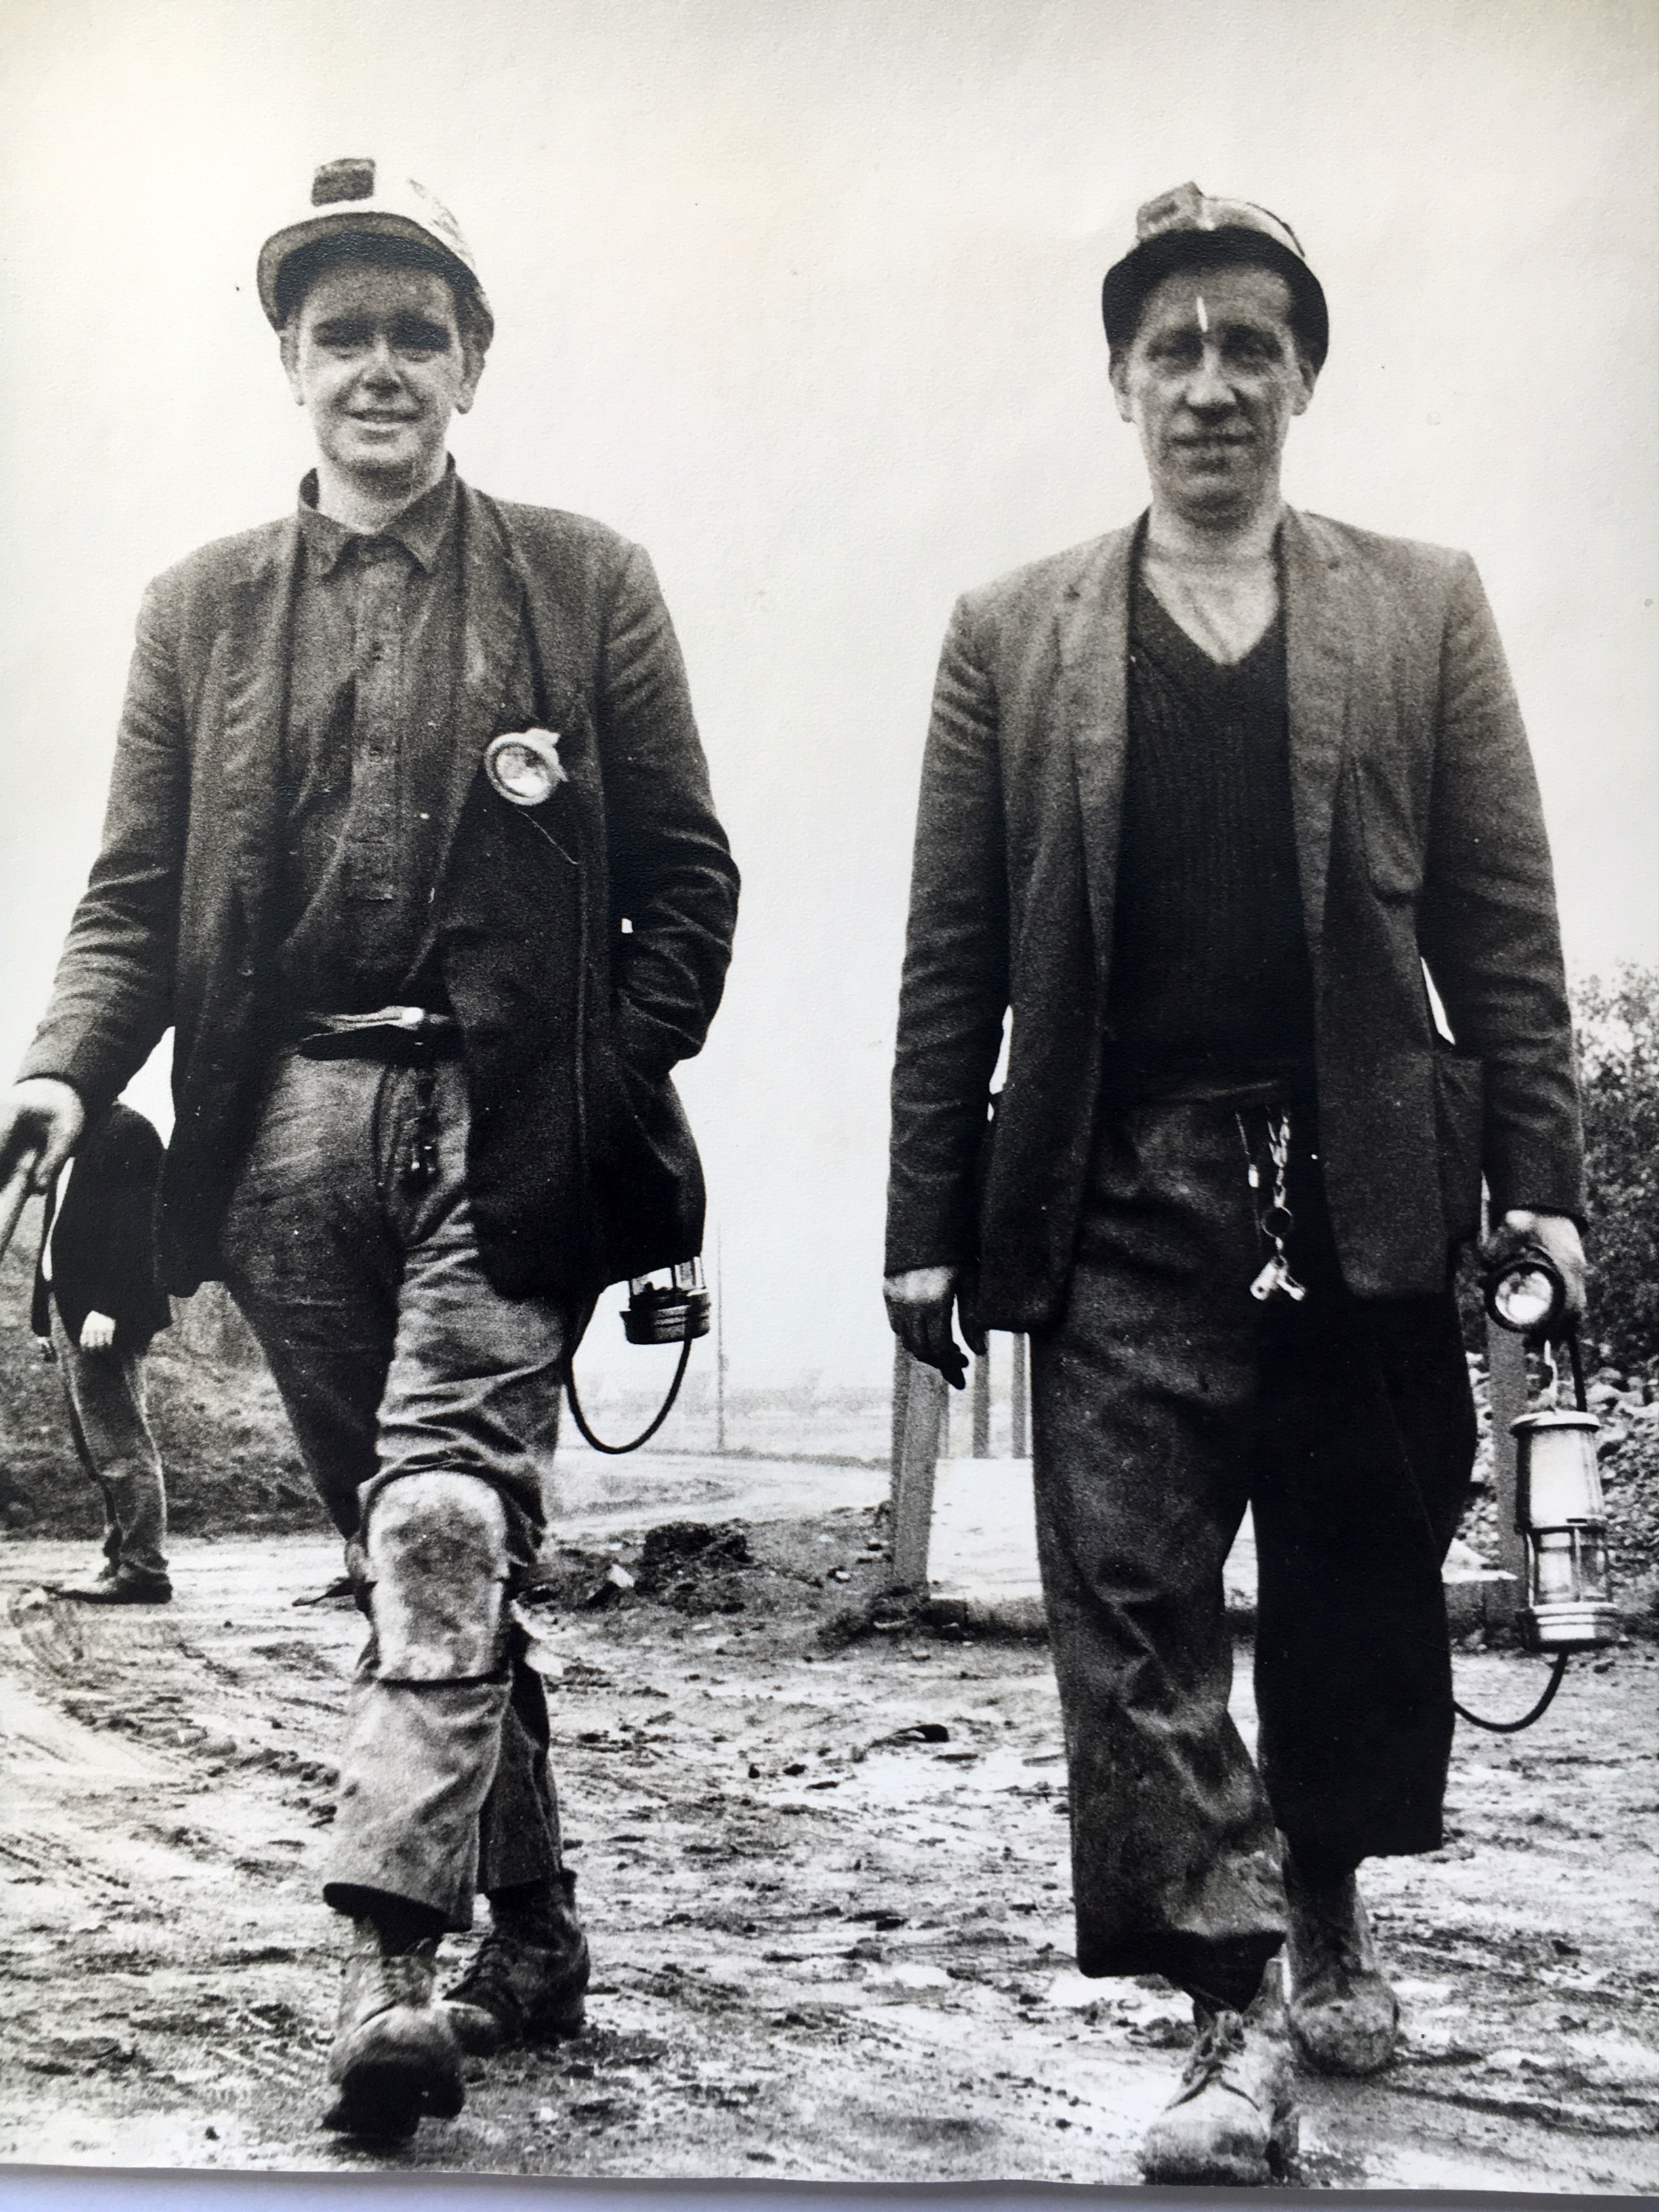 Cyril Perkins on left at Frickley Pit, Yorkshire, ca 1960s